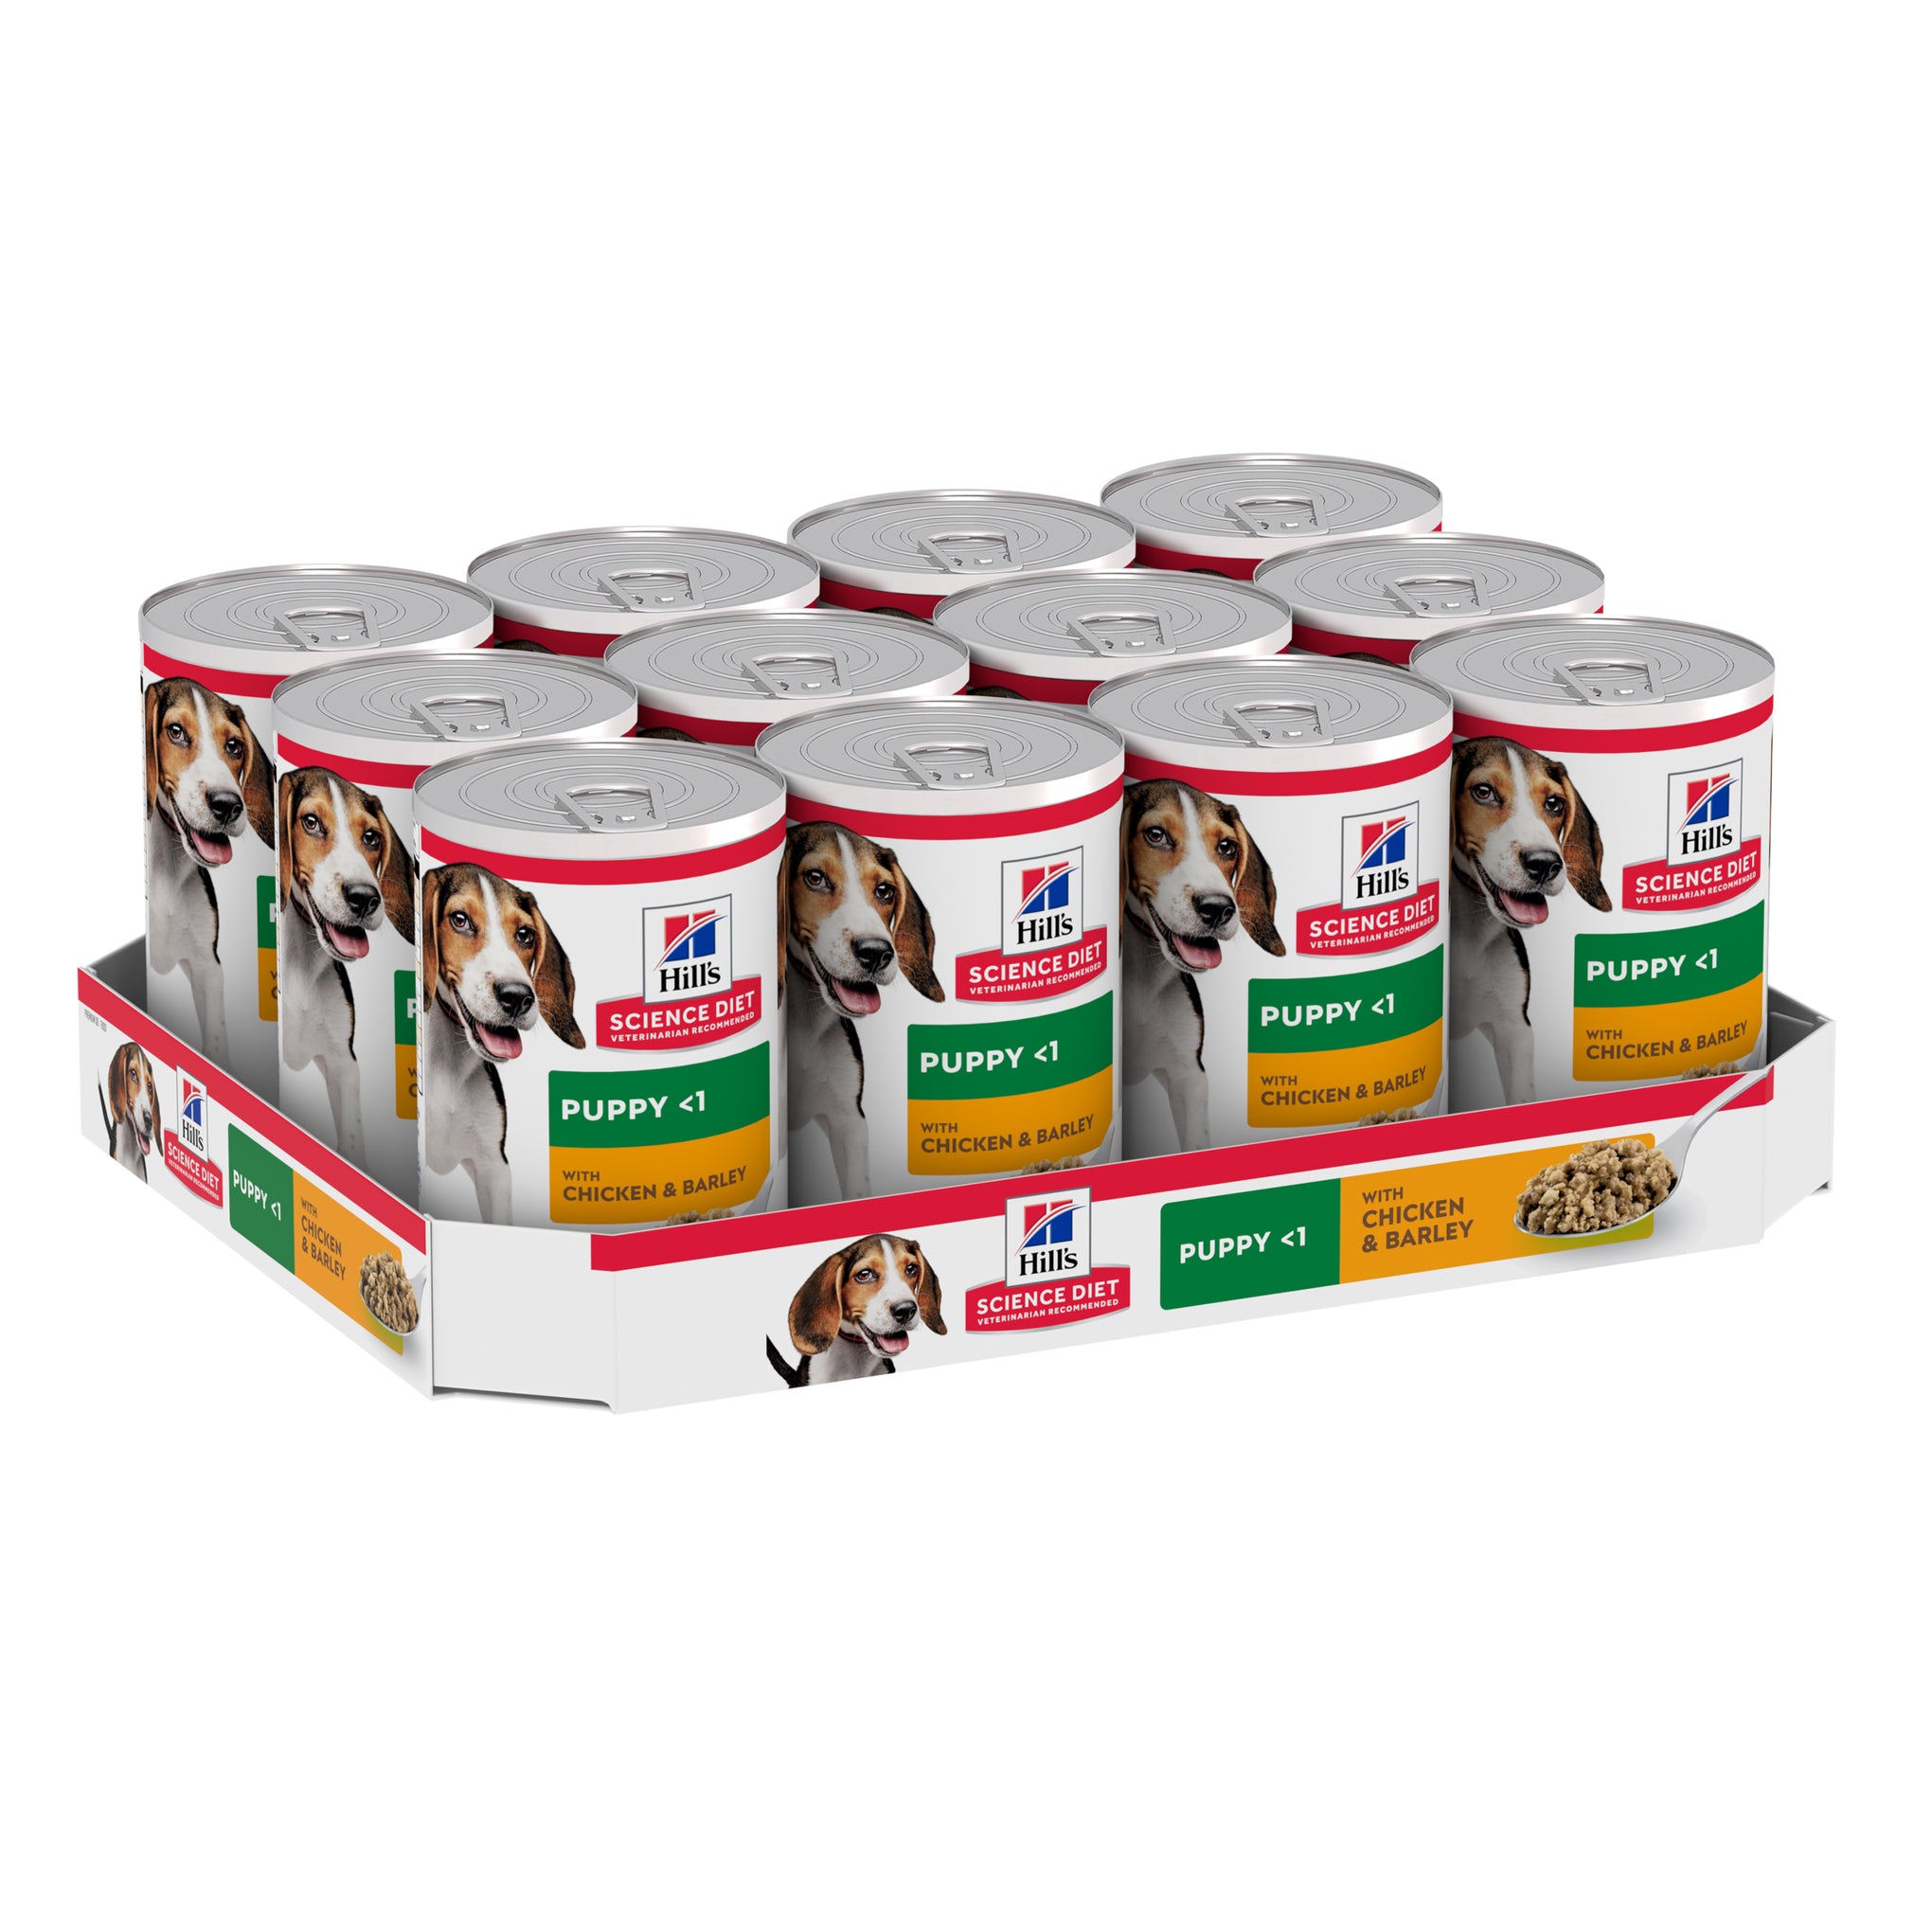 Hill's Science Diet Puppy Chicken & Barley Canned Dog Food 370g x 12